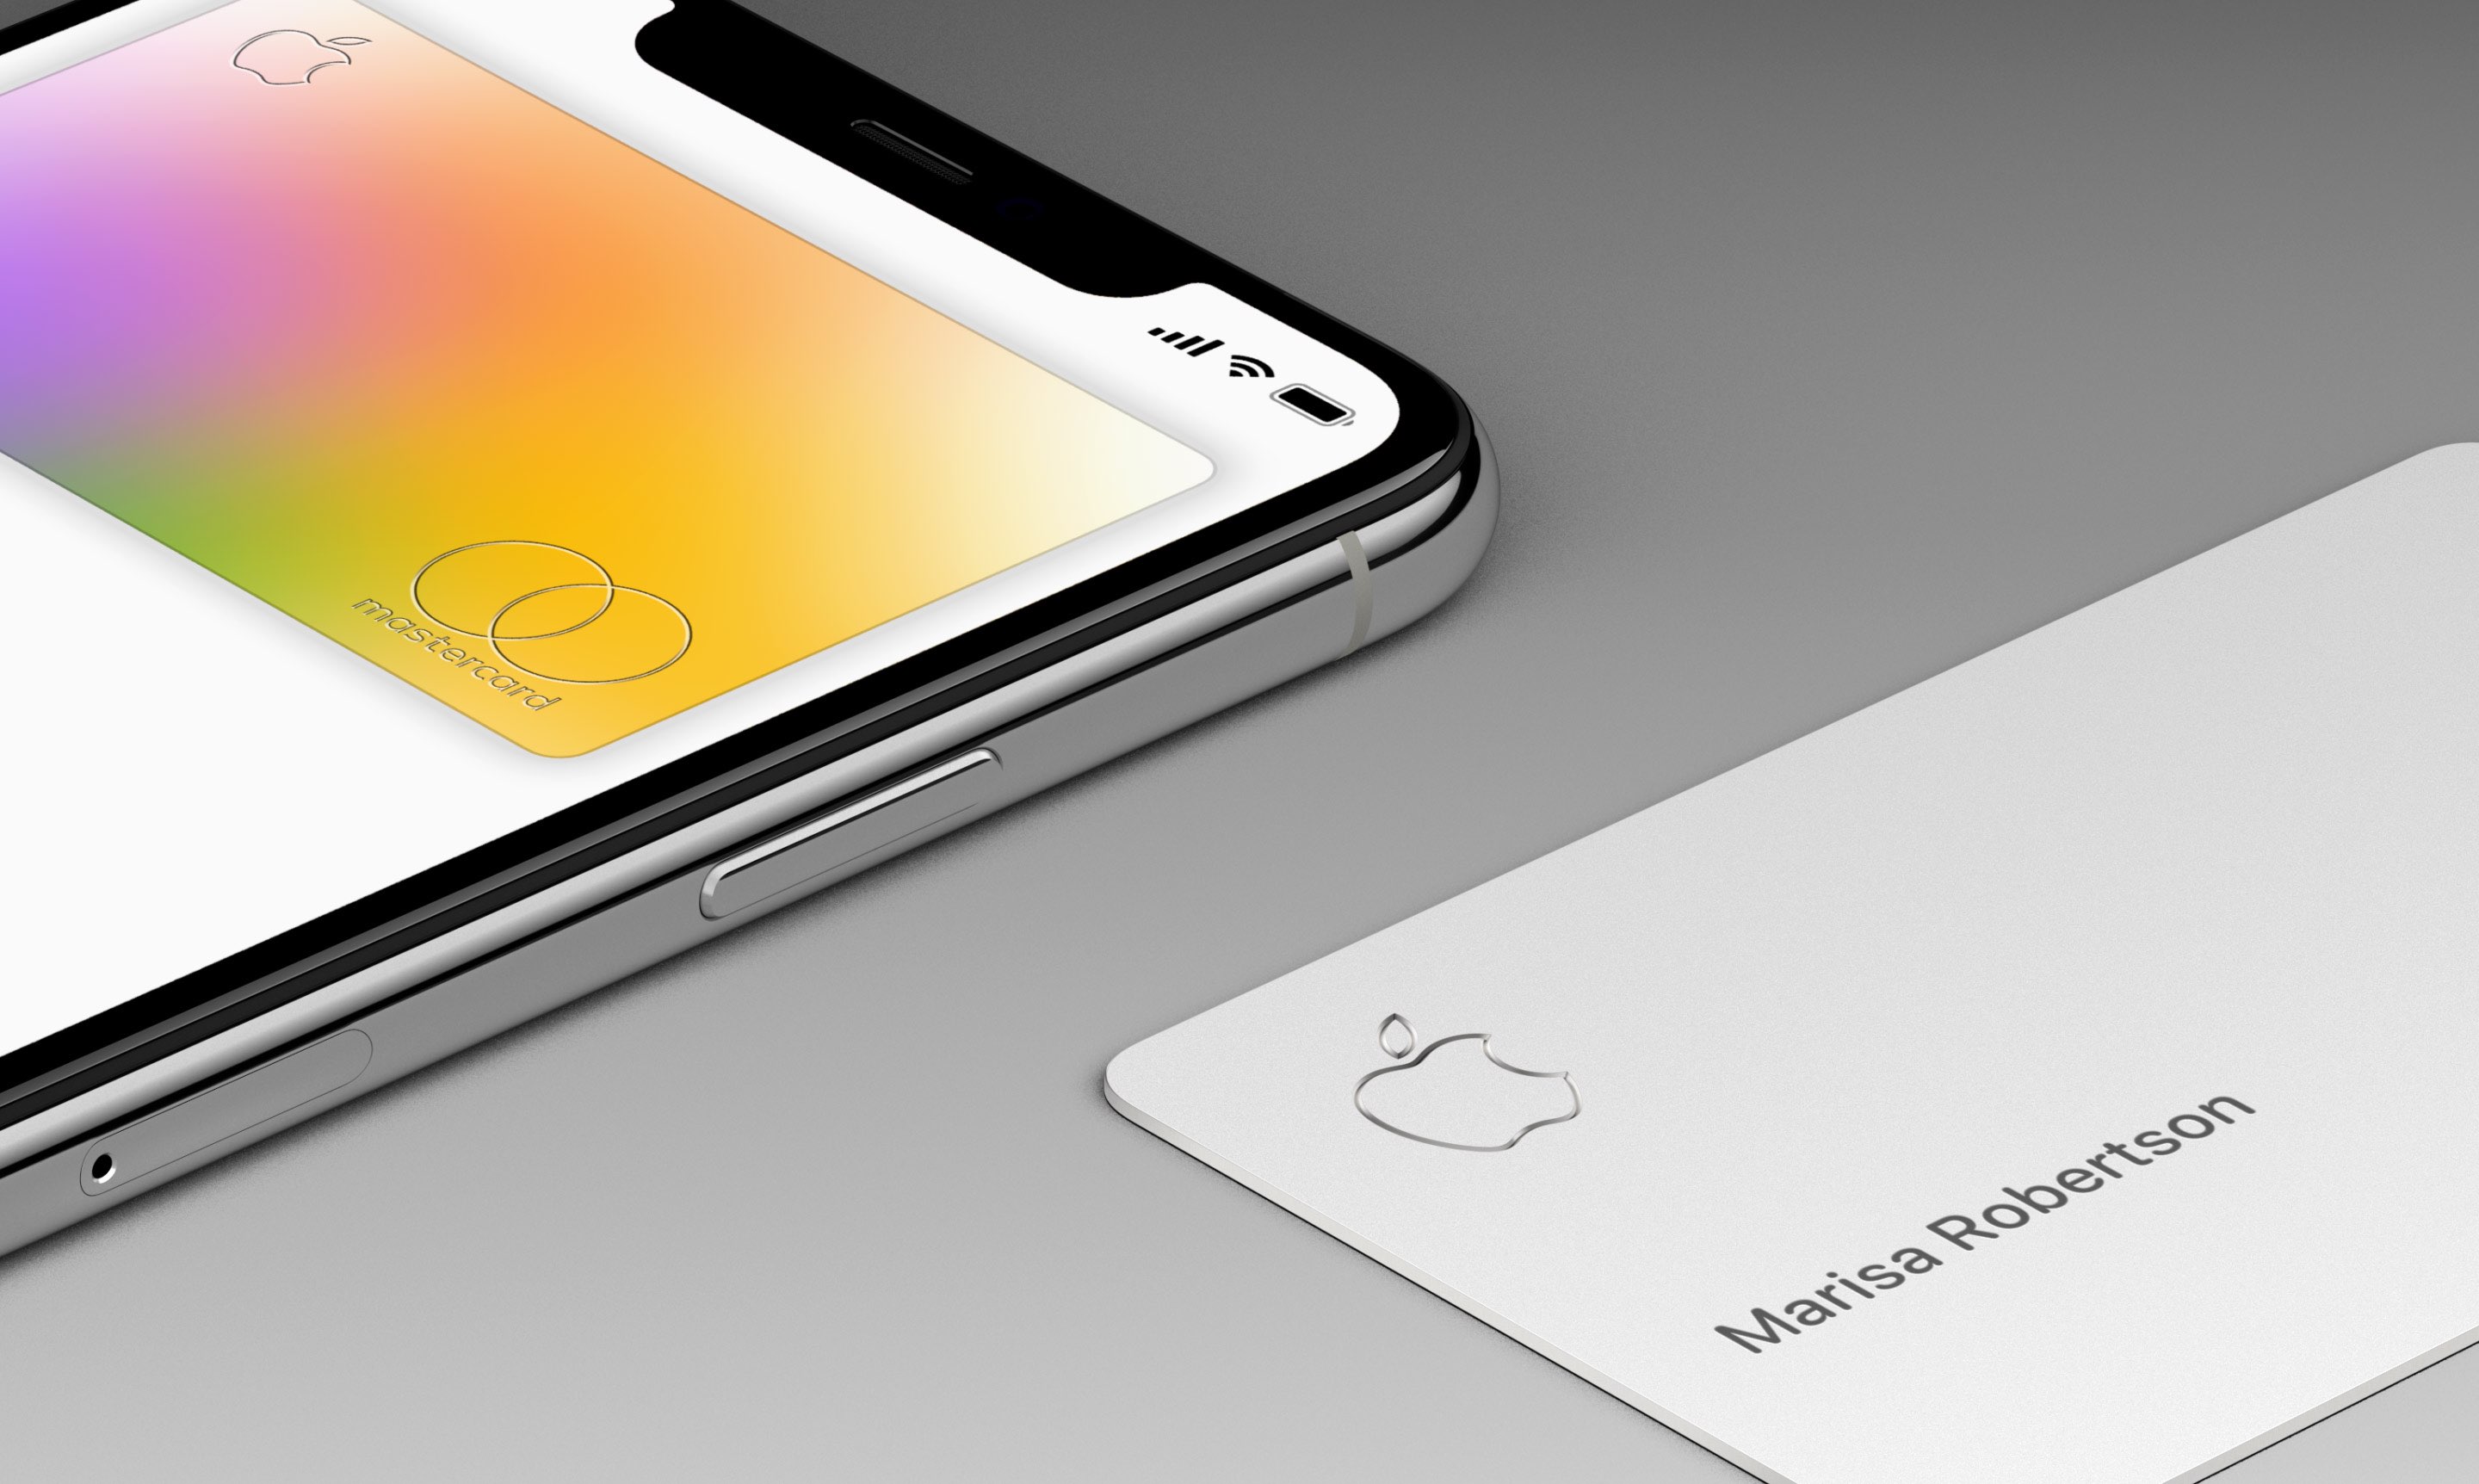 An Apple image showing the Wallet app on an iPhone along with a physical titanium card